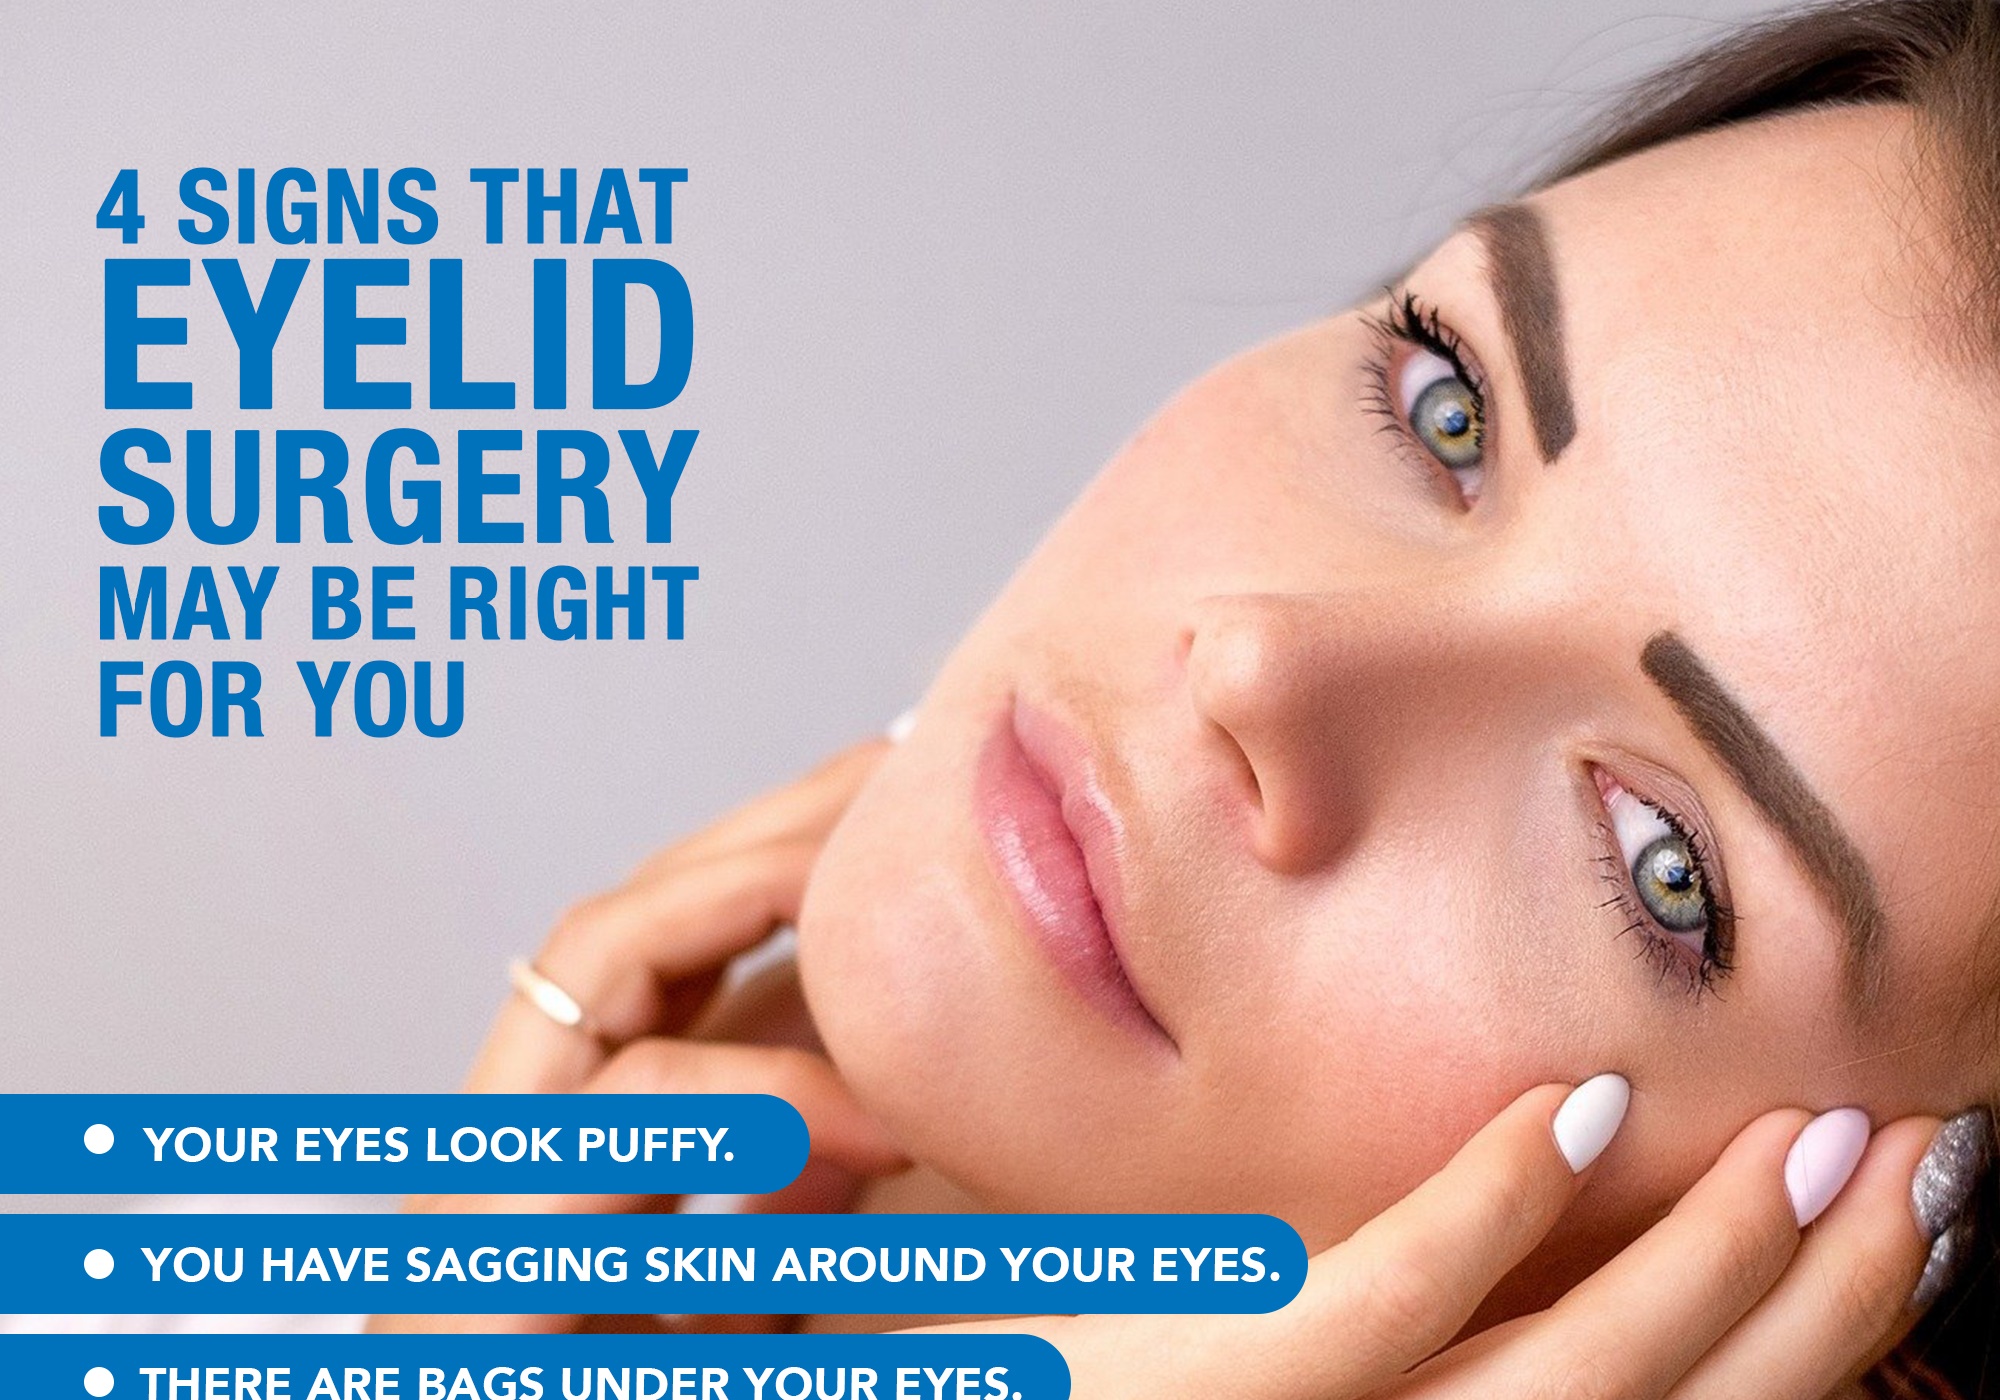 4 Signs That Eyelid Surgery May Be Right For You [Infographic]